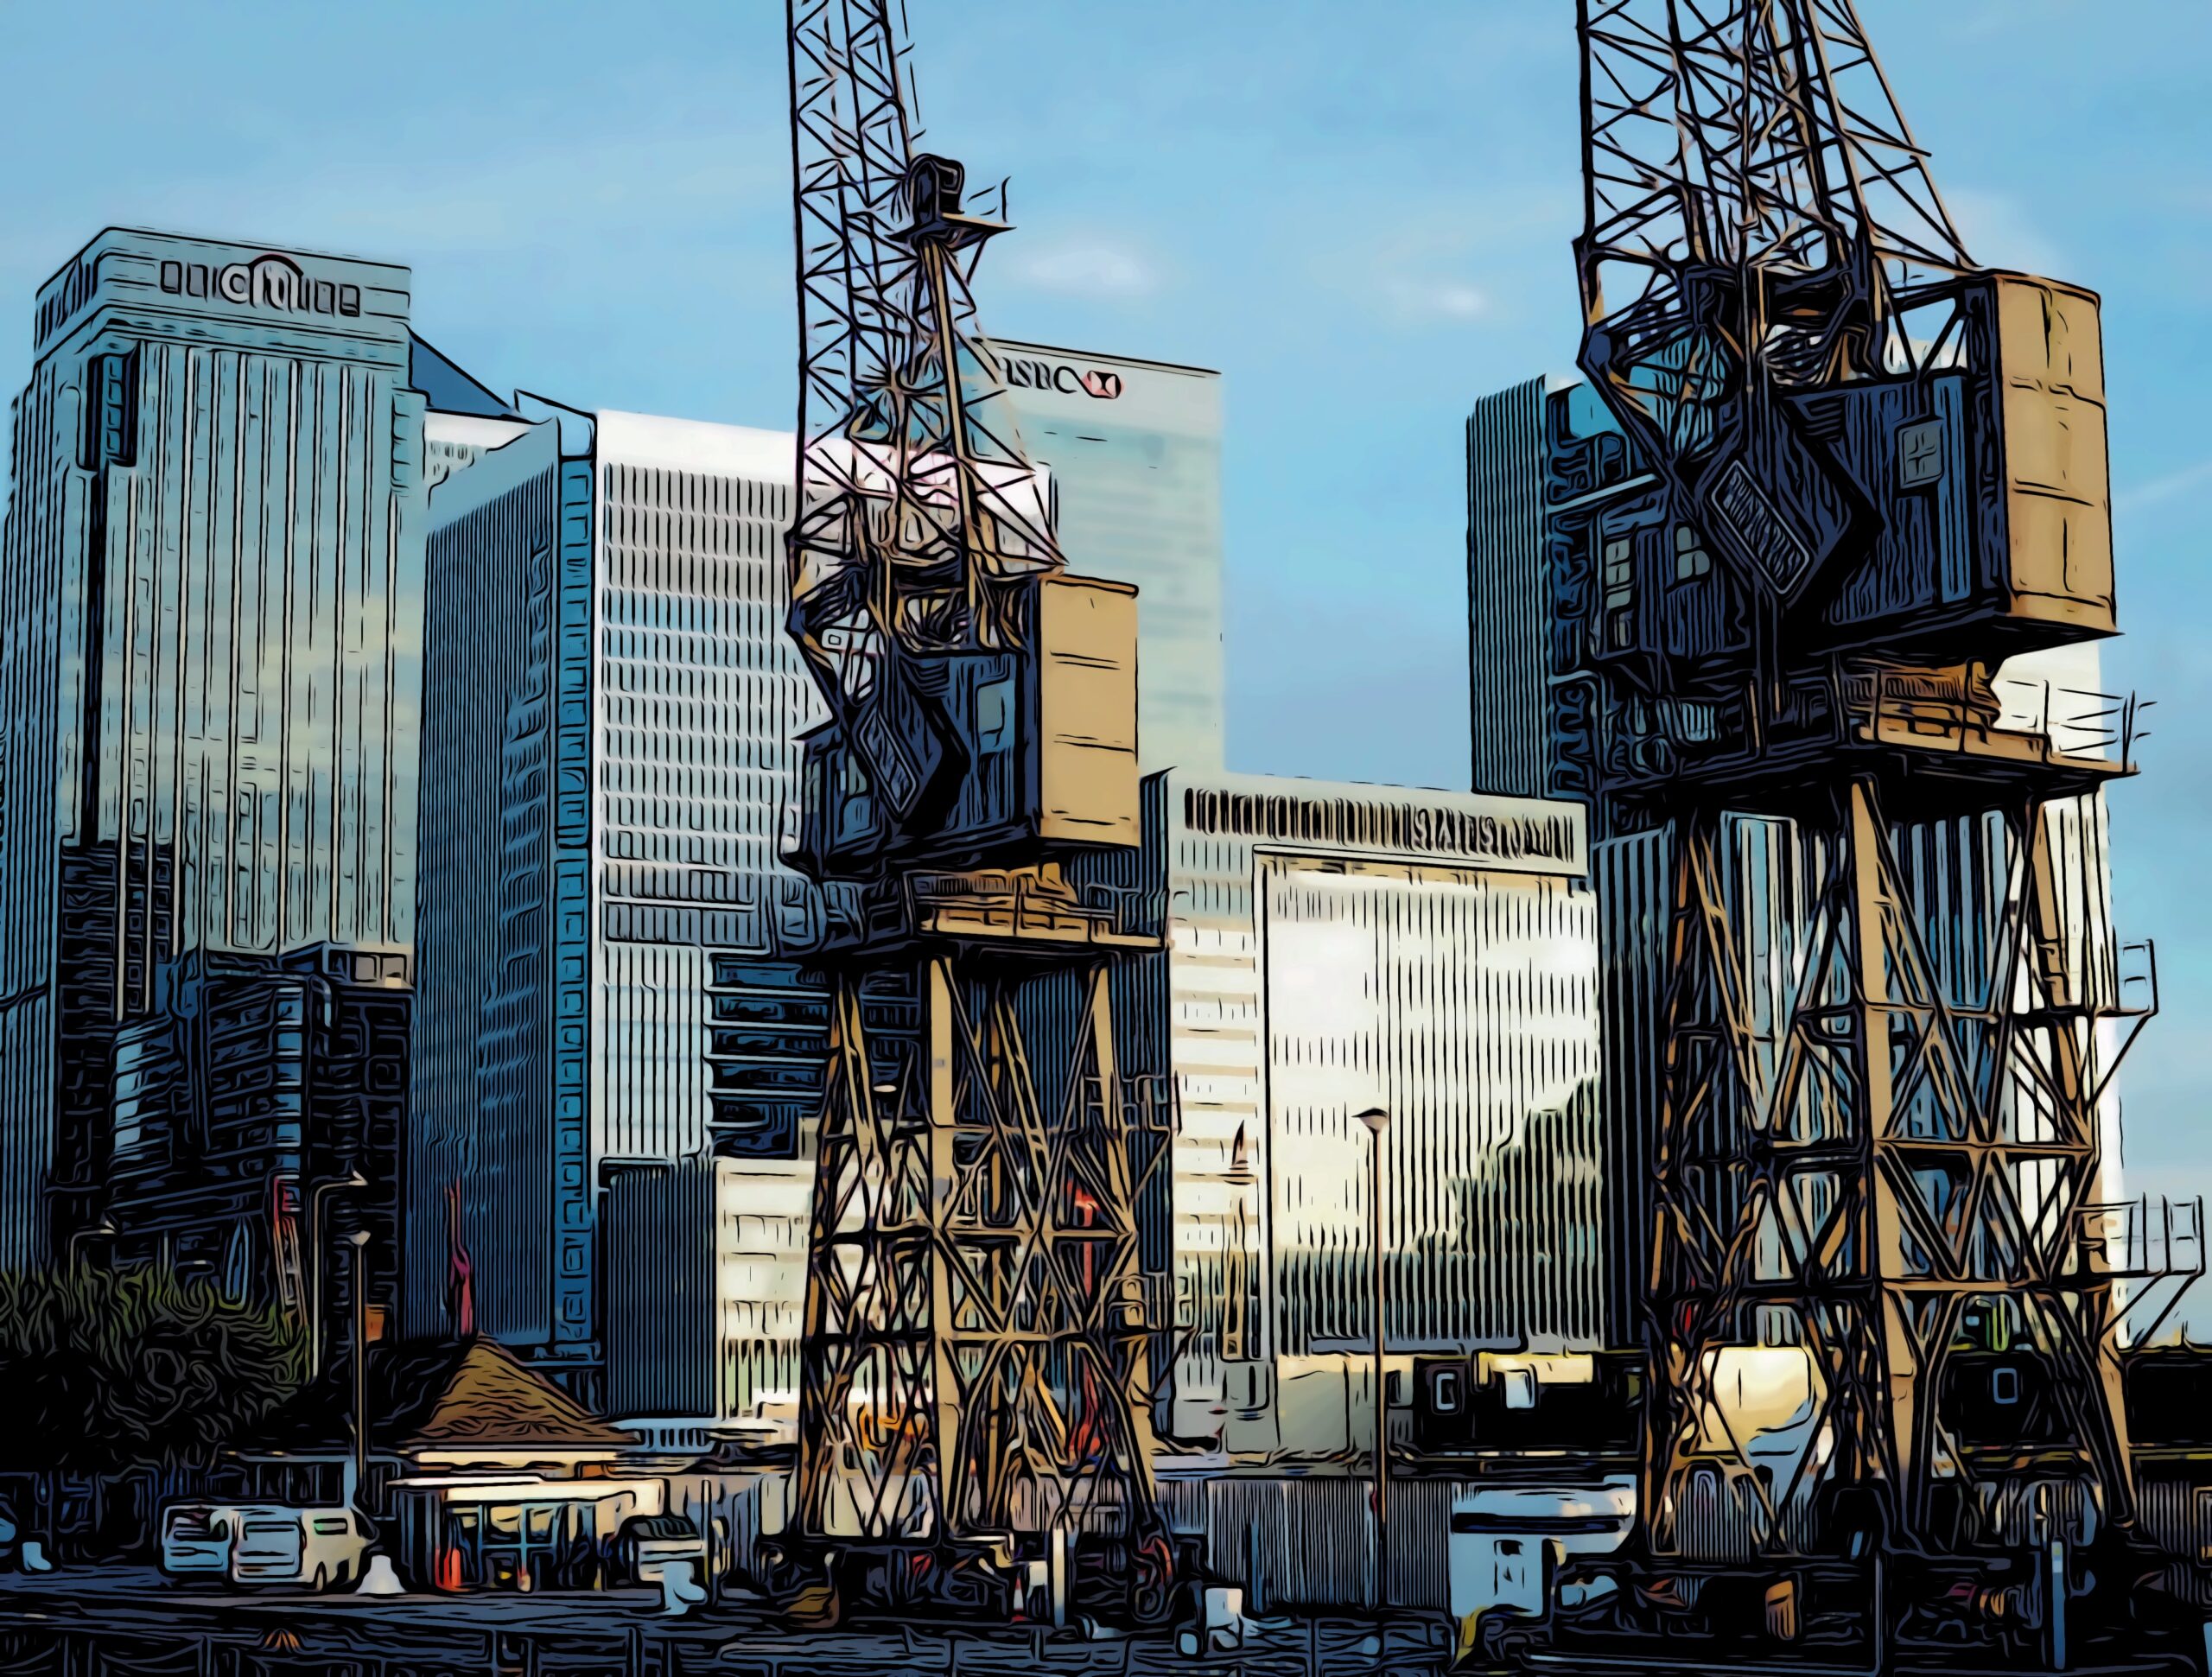 Docklands cranes with Canary Wharf’s major business skyscrapers in the background